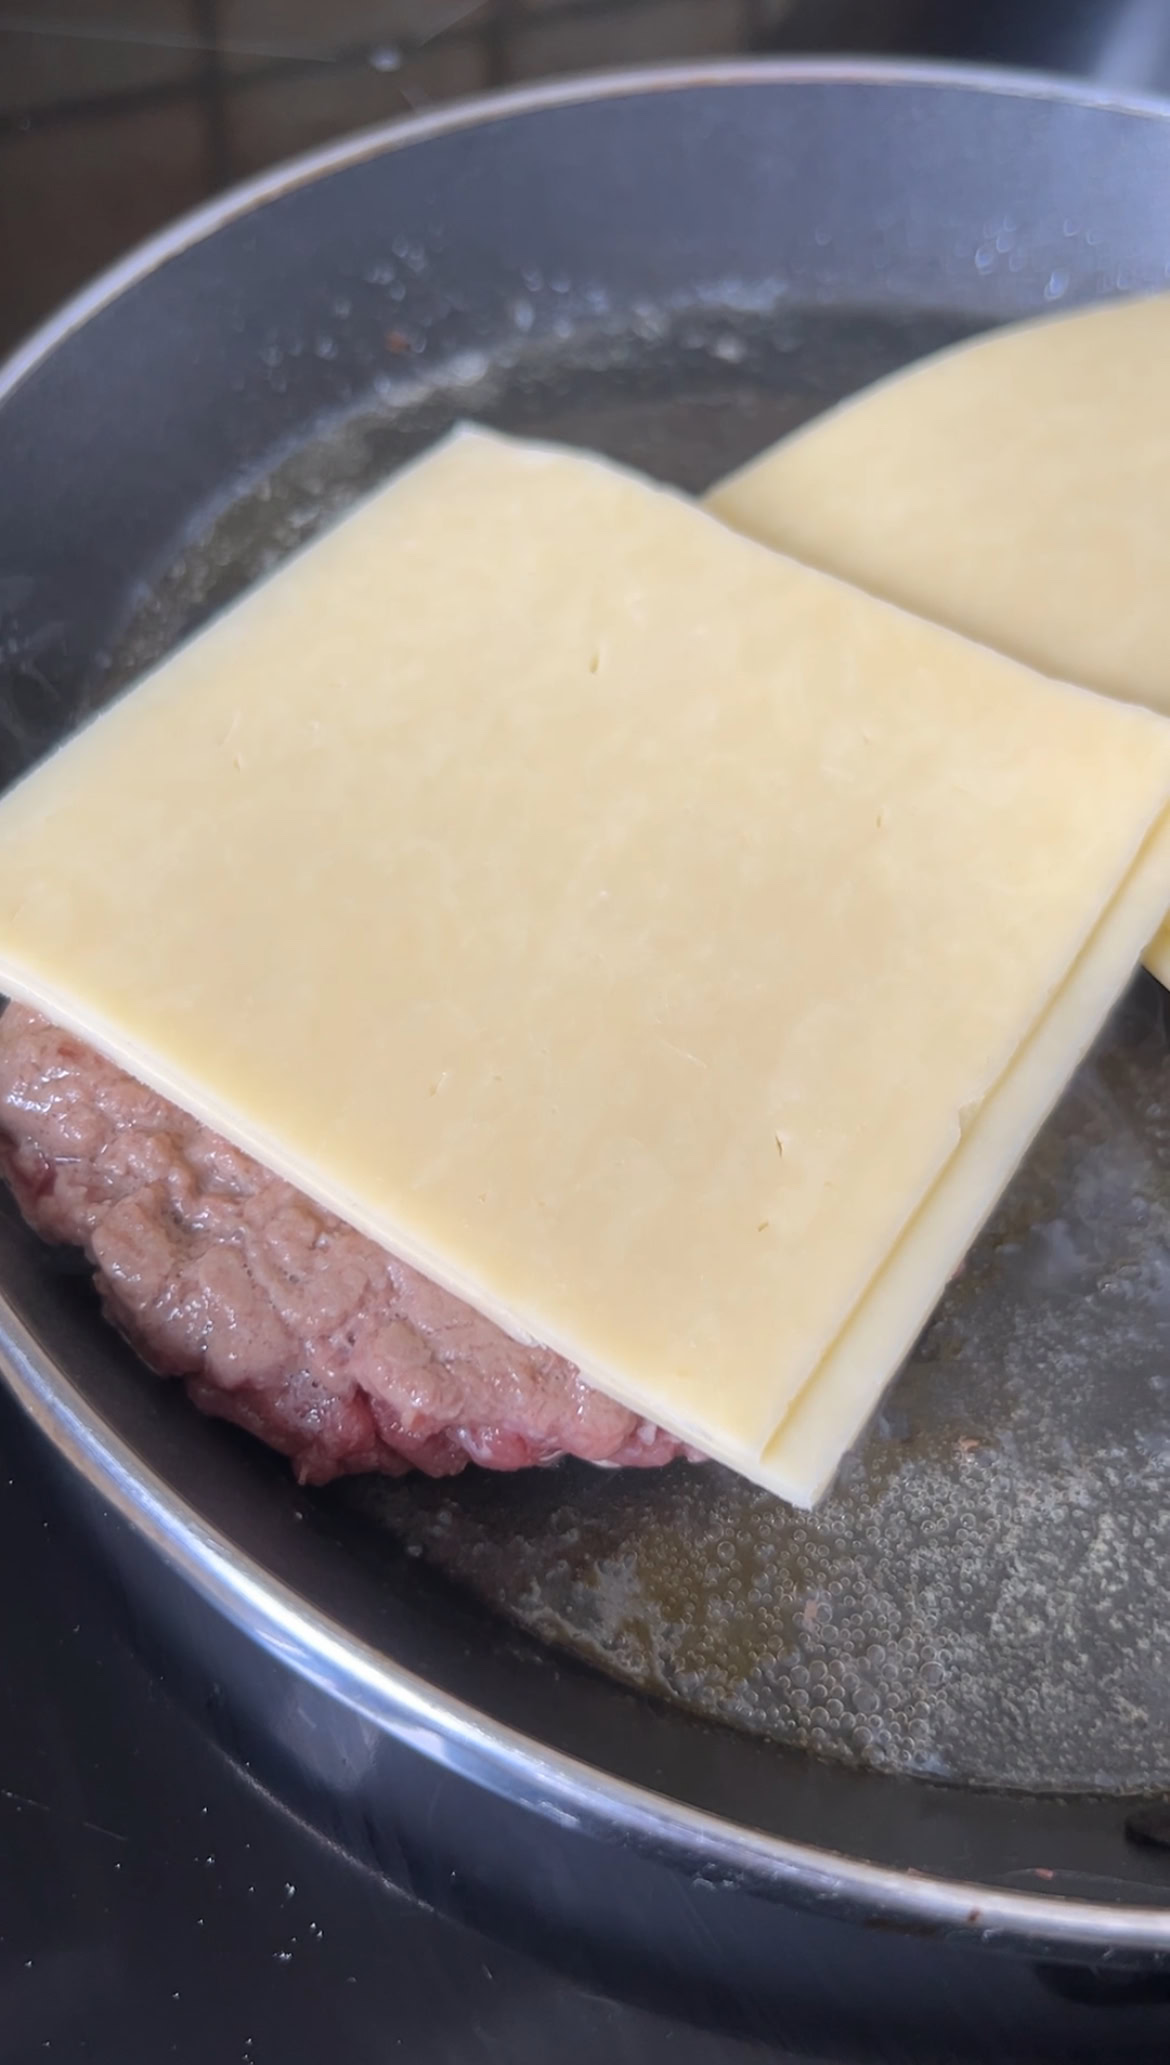 Two slices of cheddar cheese on top of the minced meat.